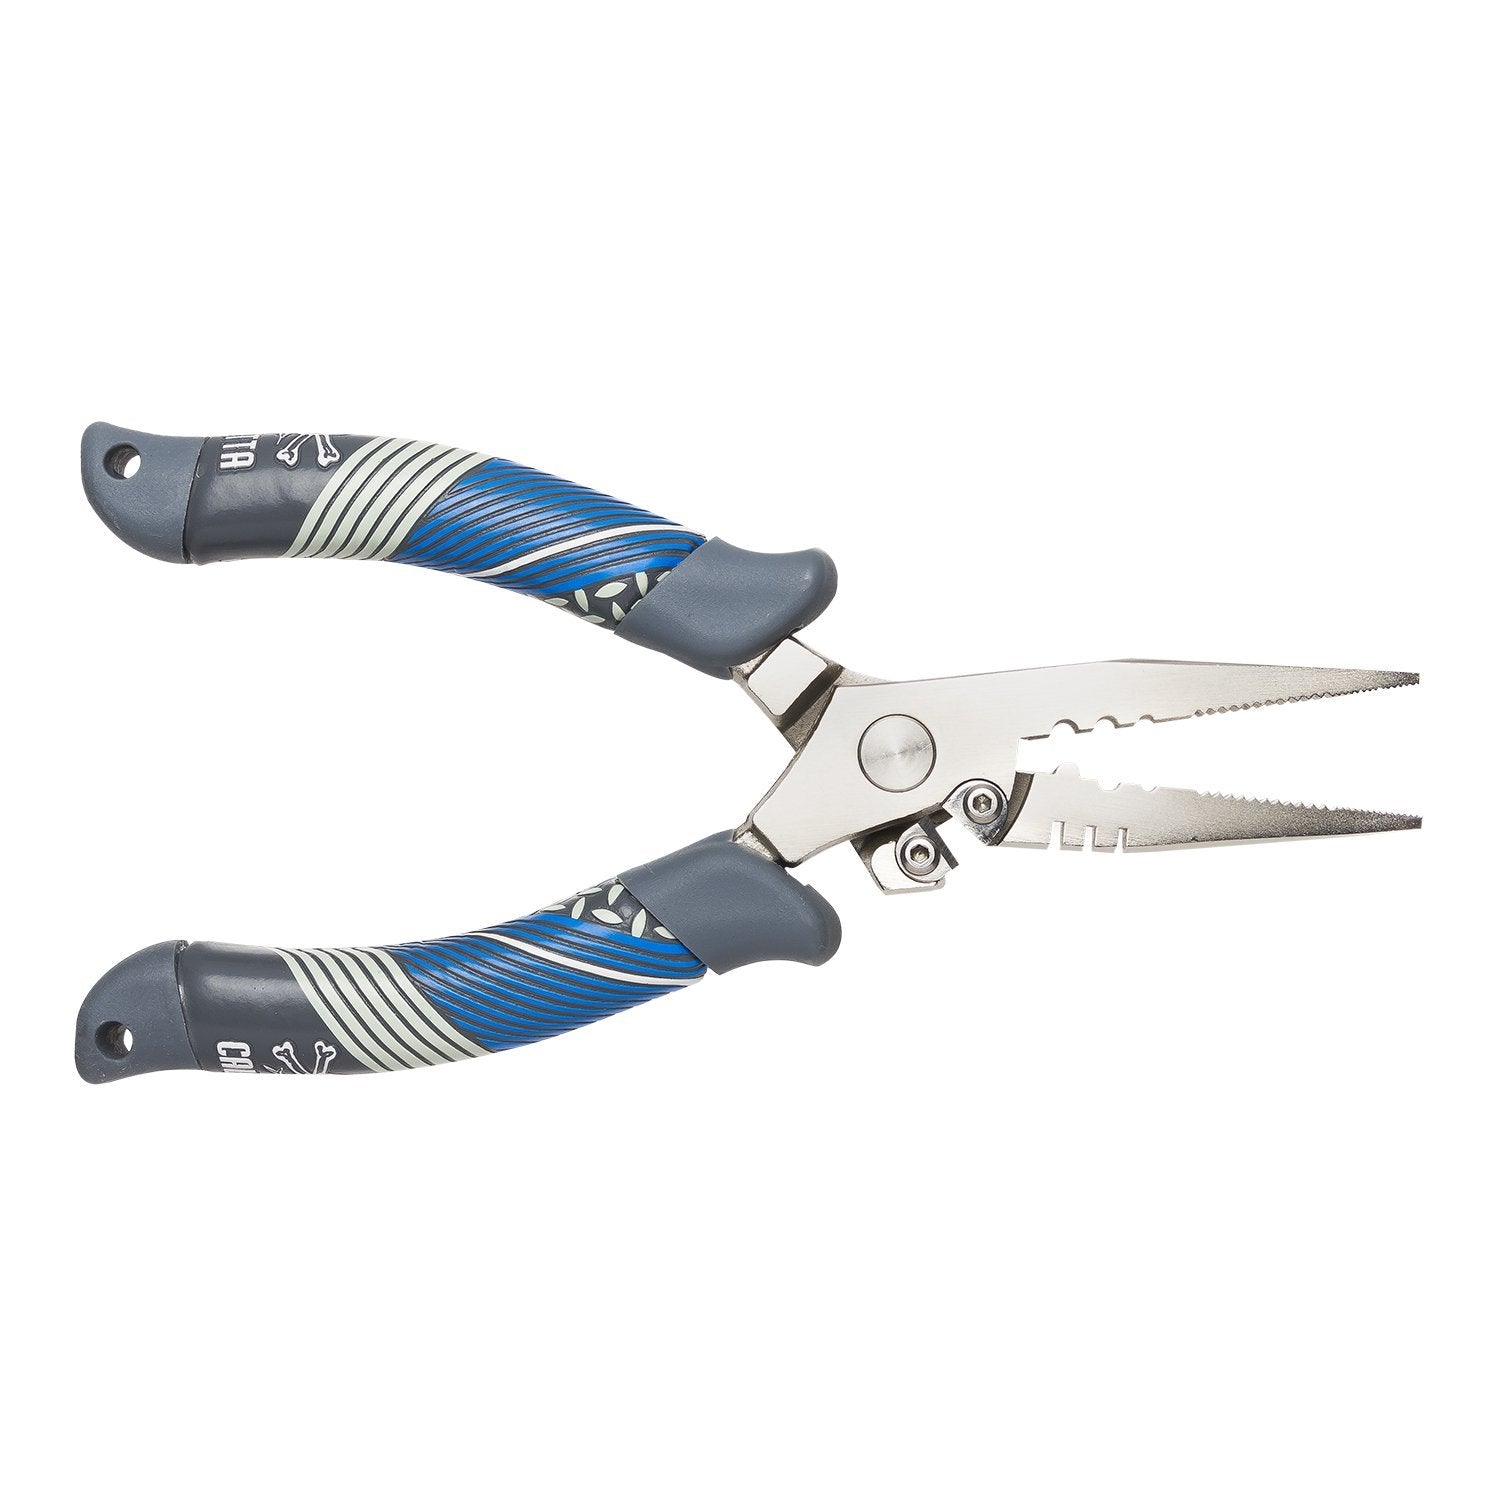 Squall Torque Series Stainless Steel Pliers with Side Cutter